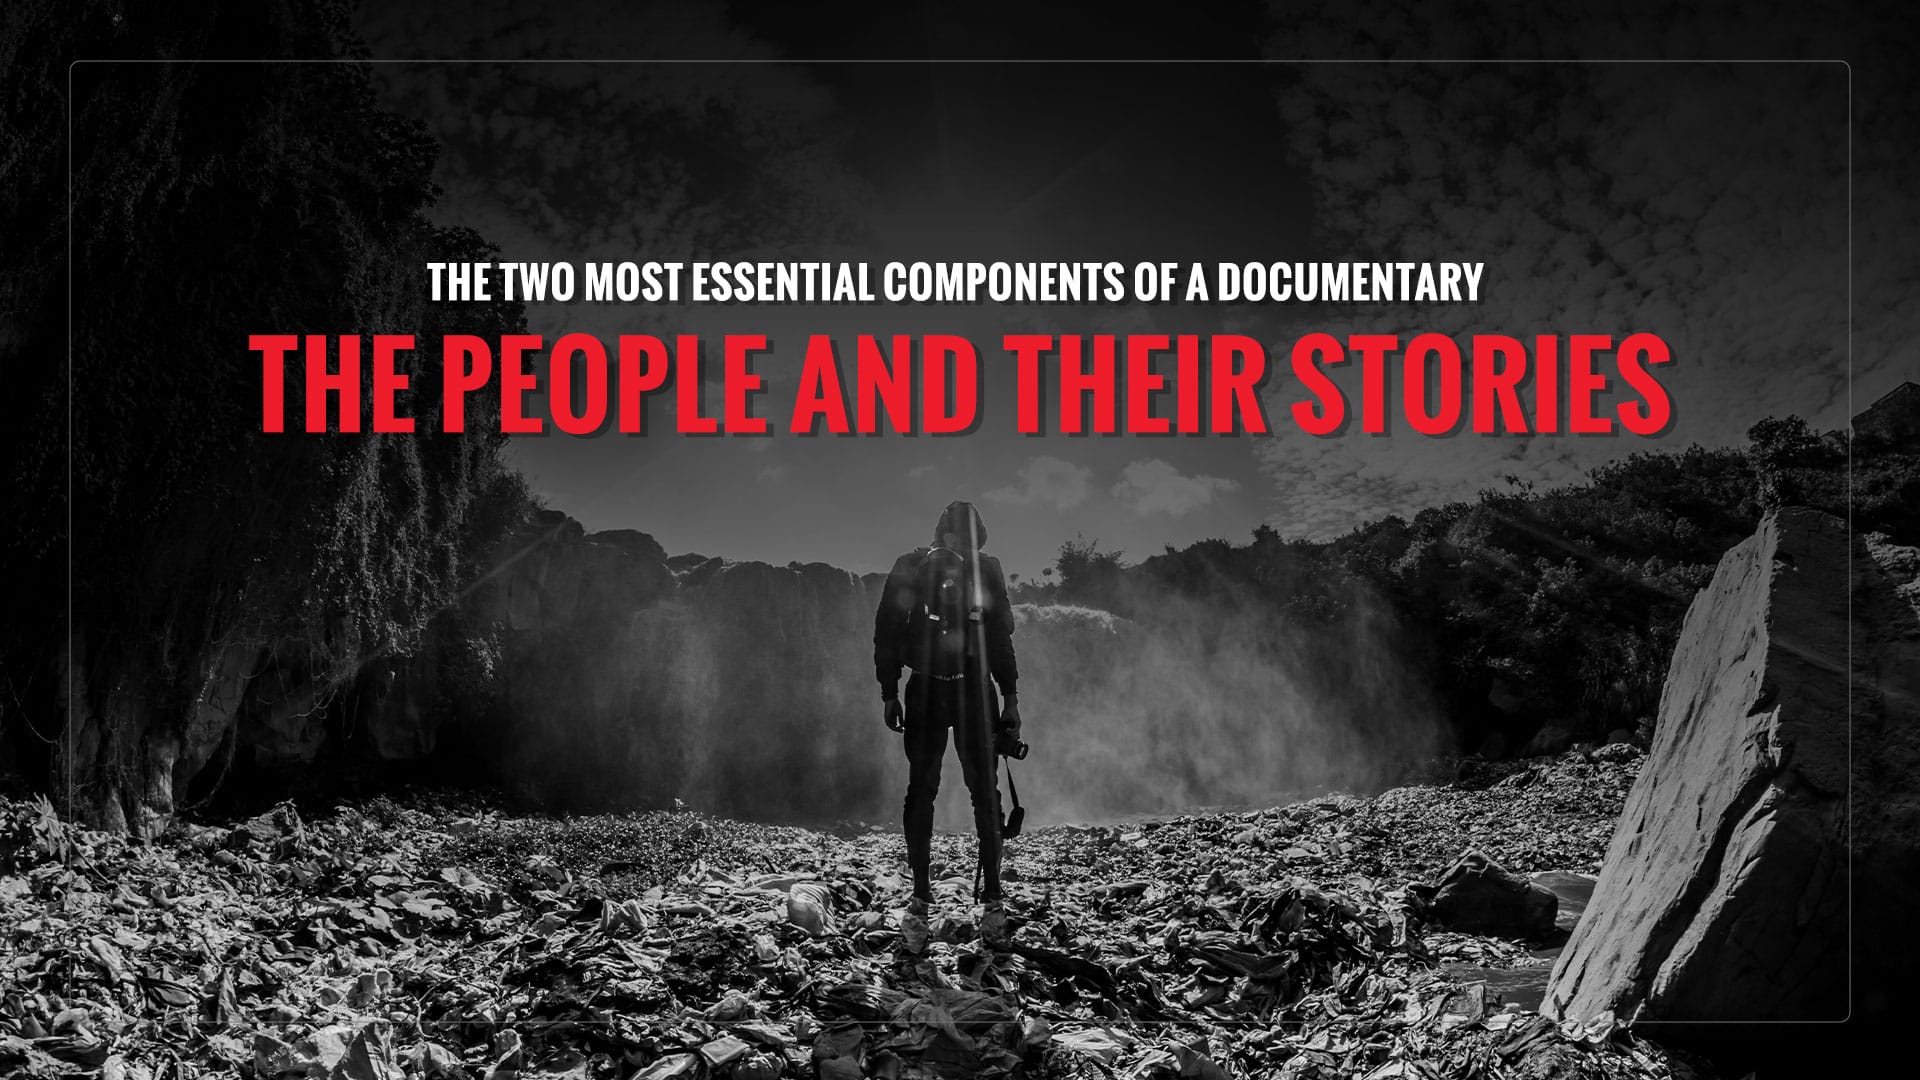 What's so captivating about documentaries?